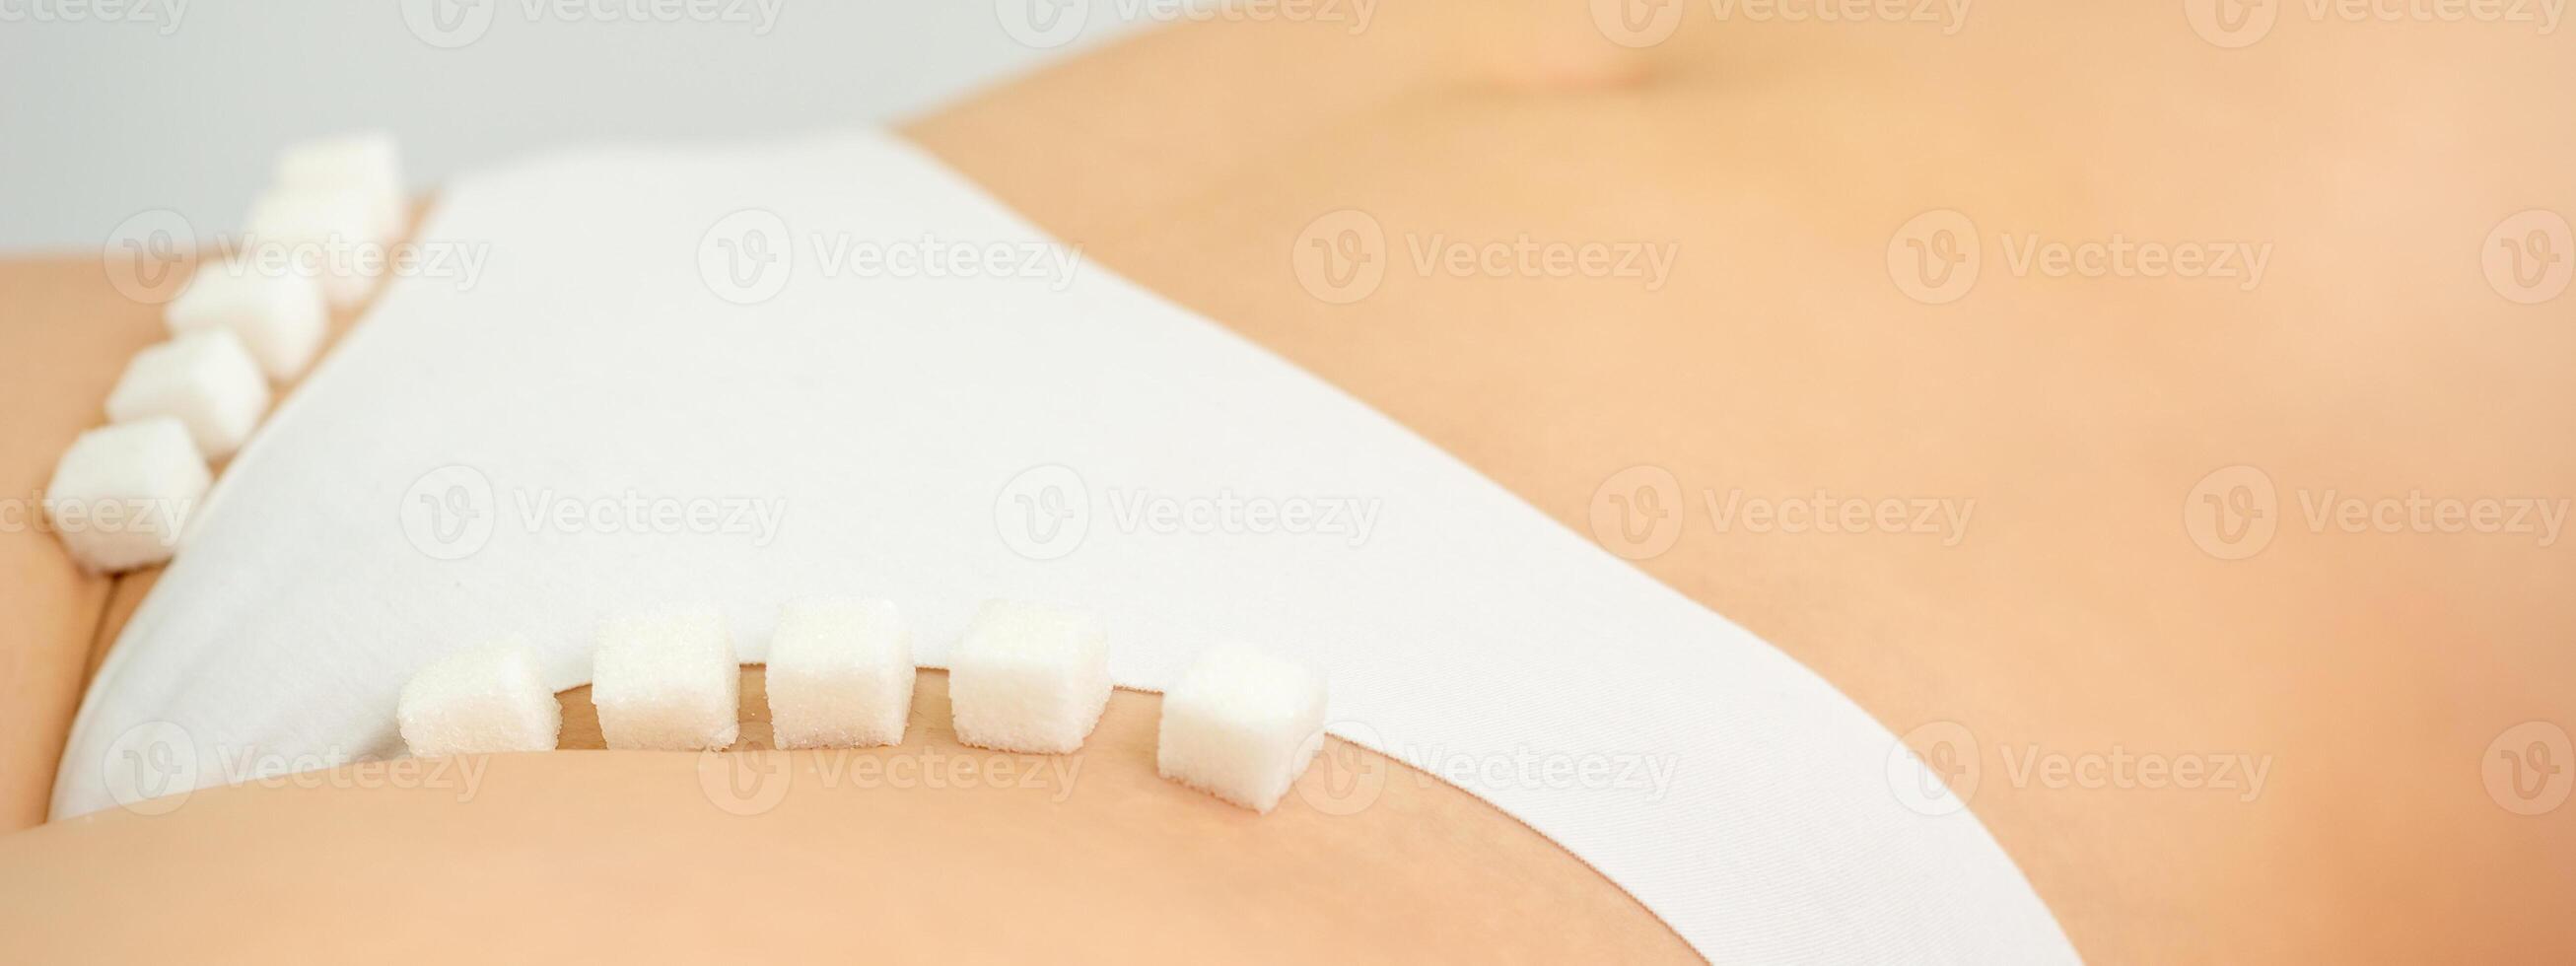 Sugar cubes lying in a row on female bikini zone, the concept of intimate depilation, problems of intimate hygiene. photo